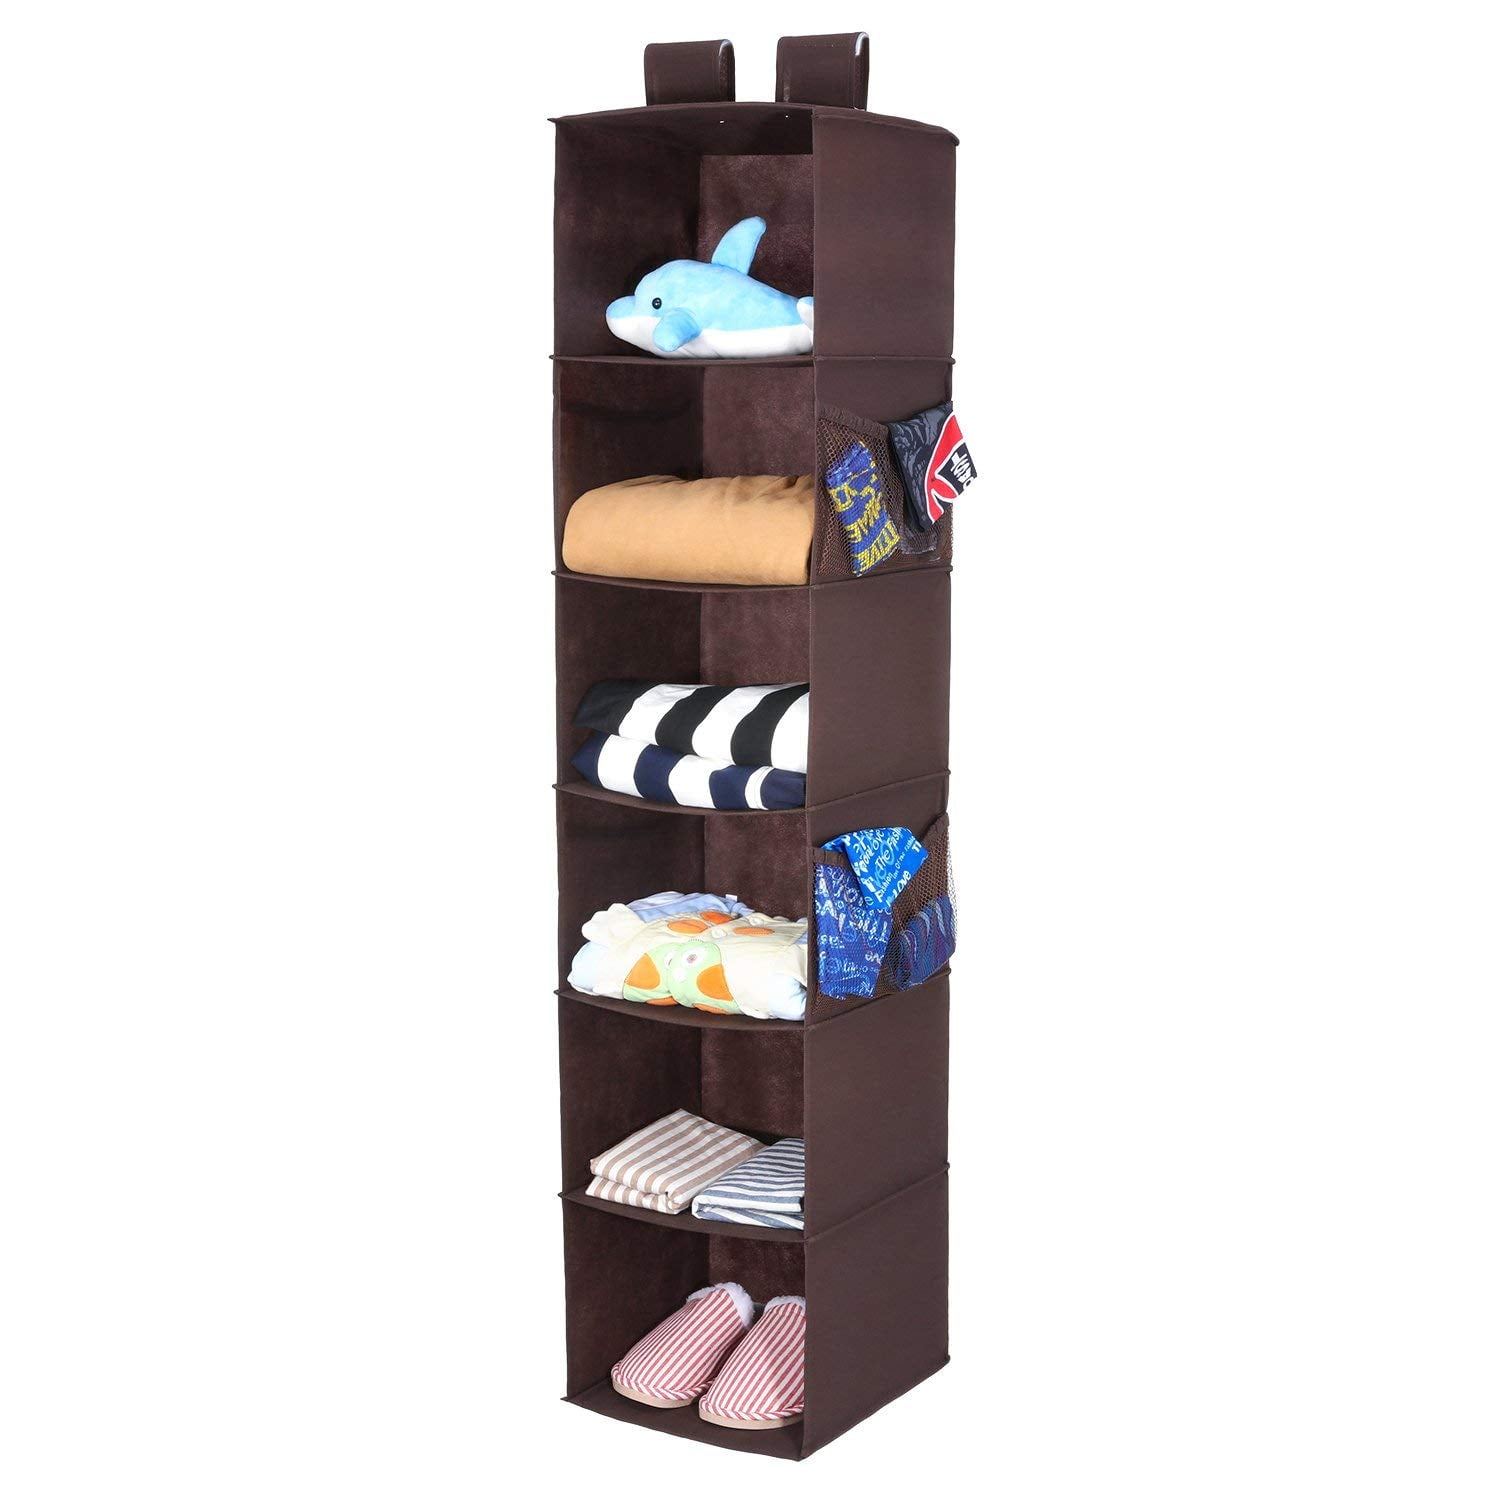 Foldable Clothes Hanging Shelf for Sweater Bra Socks 1 Drawer with Divider & 1 Underwear Drawer Magicfly 6-Shelf Hanging Closet Organizer with Drawers Beige 44.9 X 13 X11.4 Inch